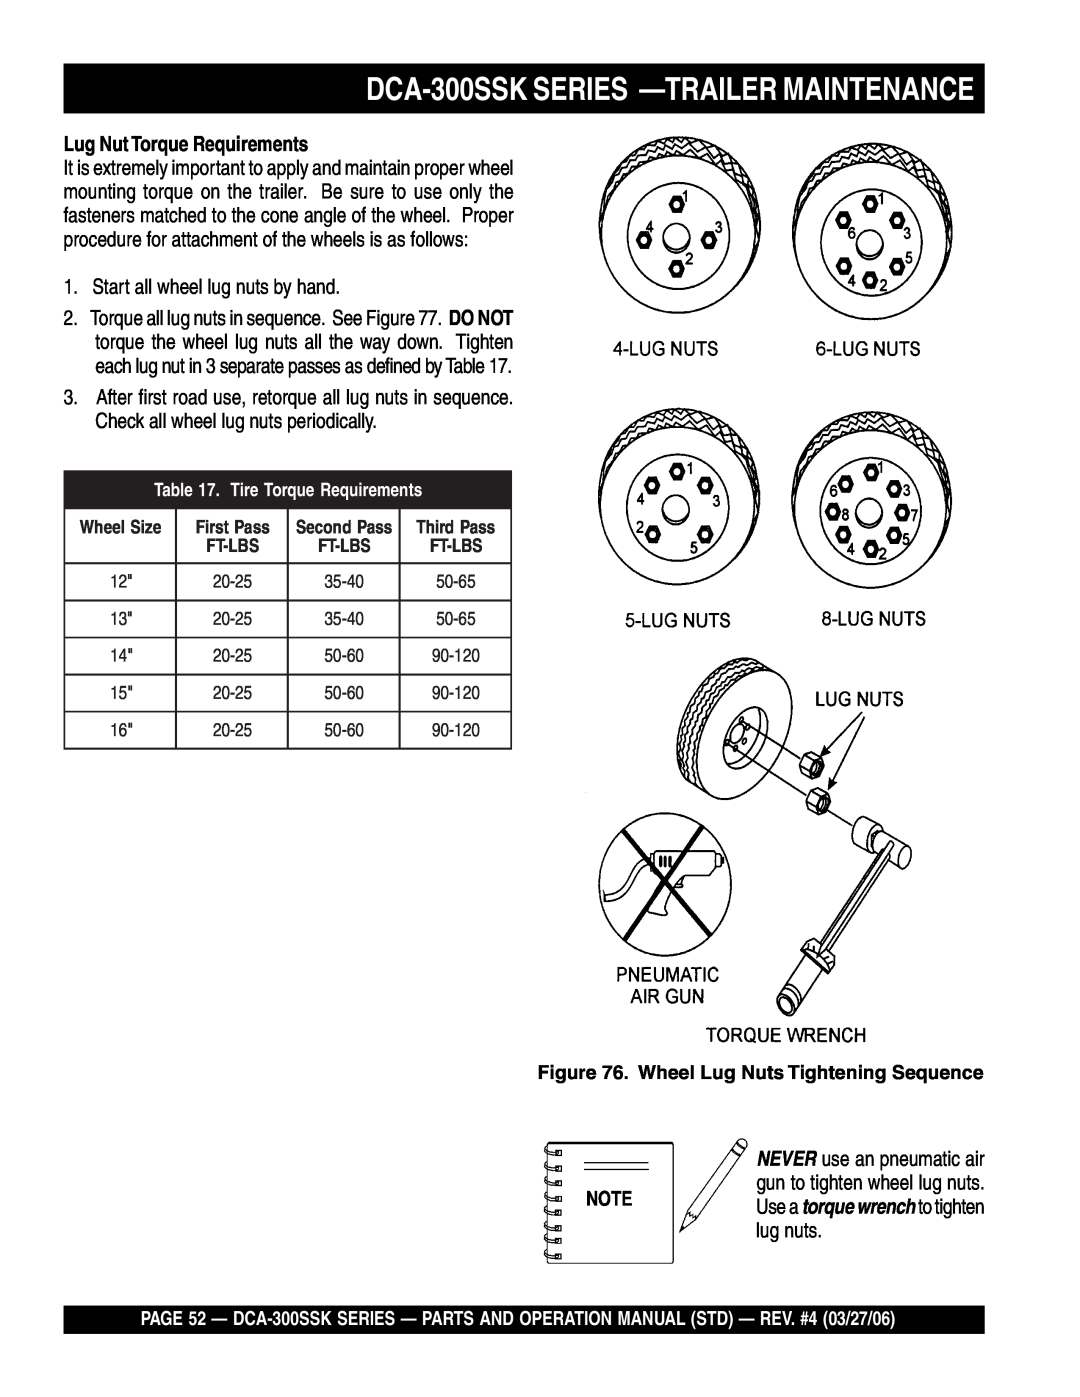 Multiquip manual DCA-300SSK SERIES -TRAILER MAINTENANCE, Lug Nut Torque Requirements, Wheel Lug Nuts Tightening Sequence 